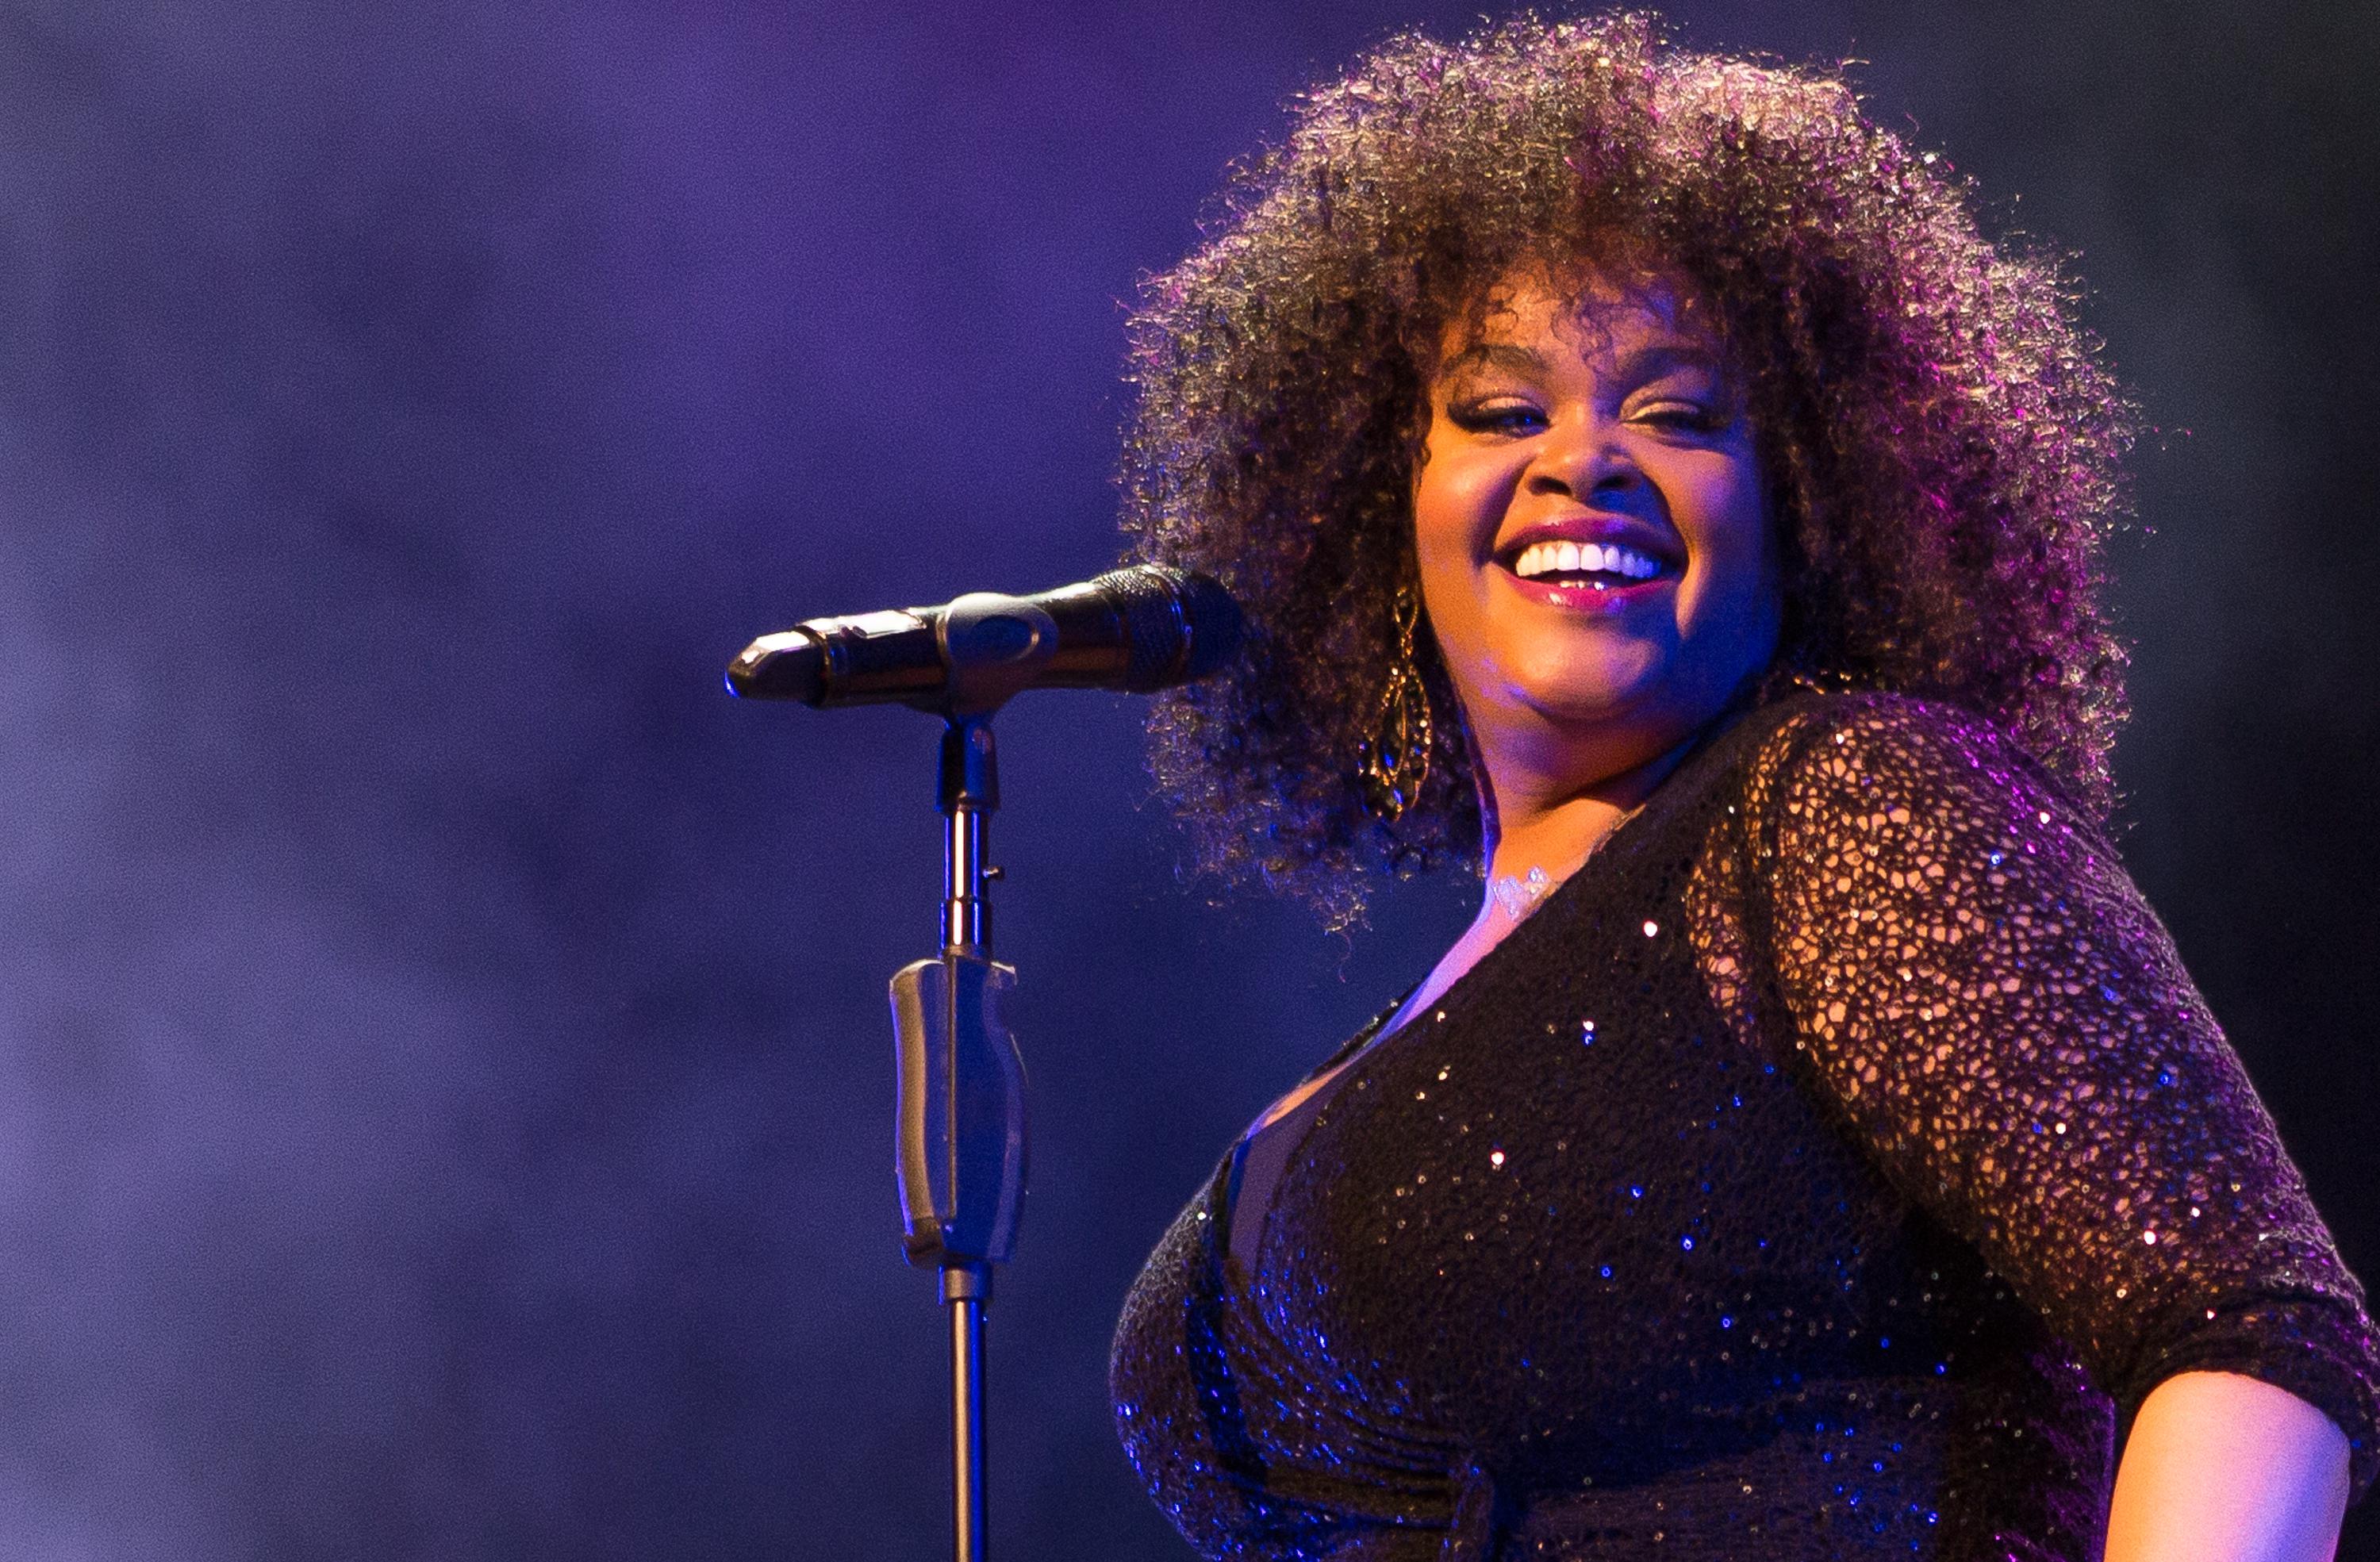 Jill Scott Announces New Podcast J.iLL the Podcast With iHeart Media